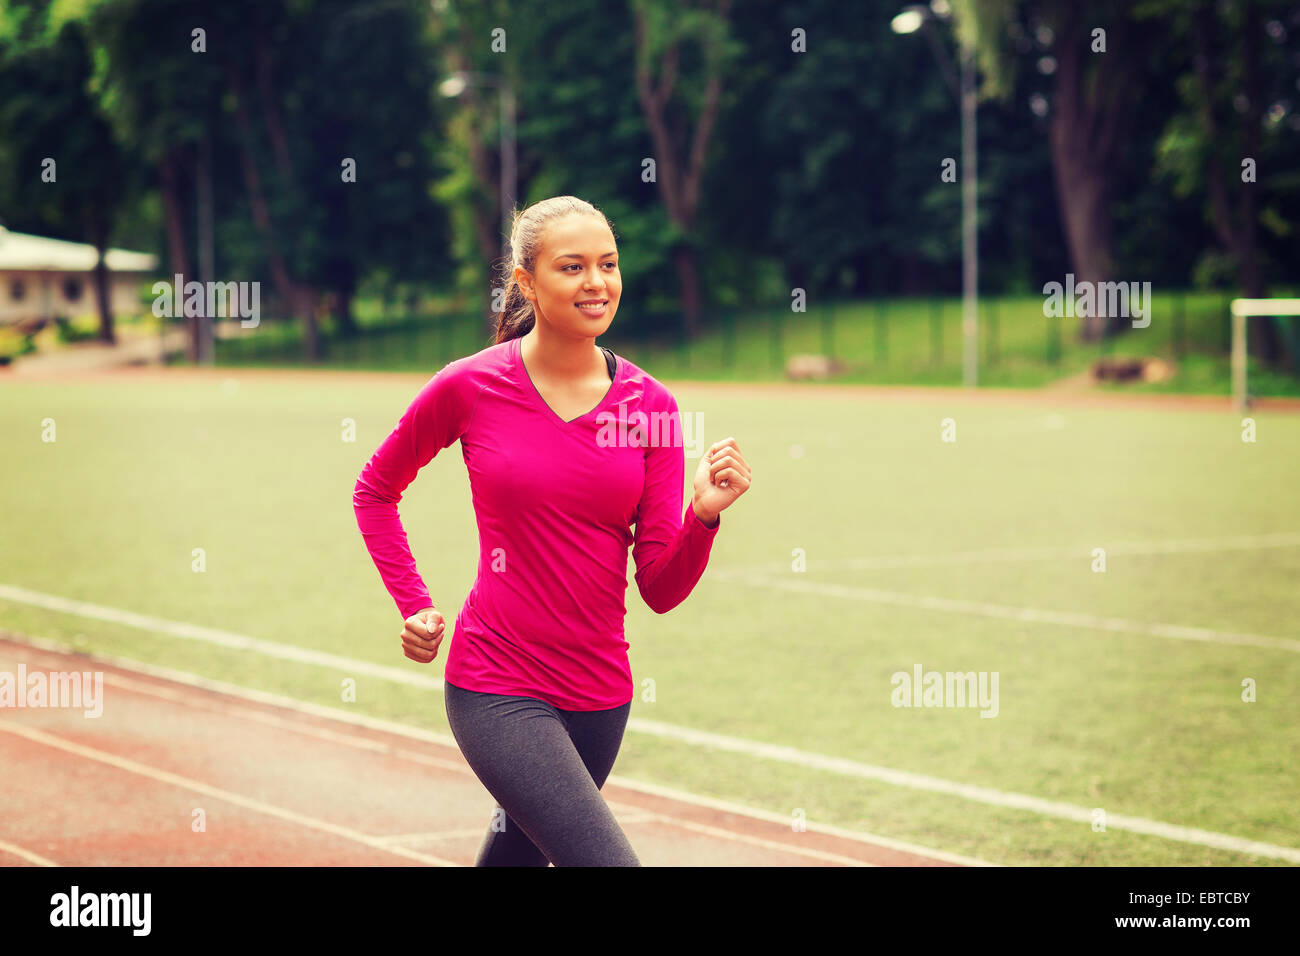 smiling woman running on track outdoors Stock Photo